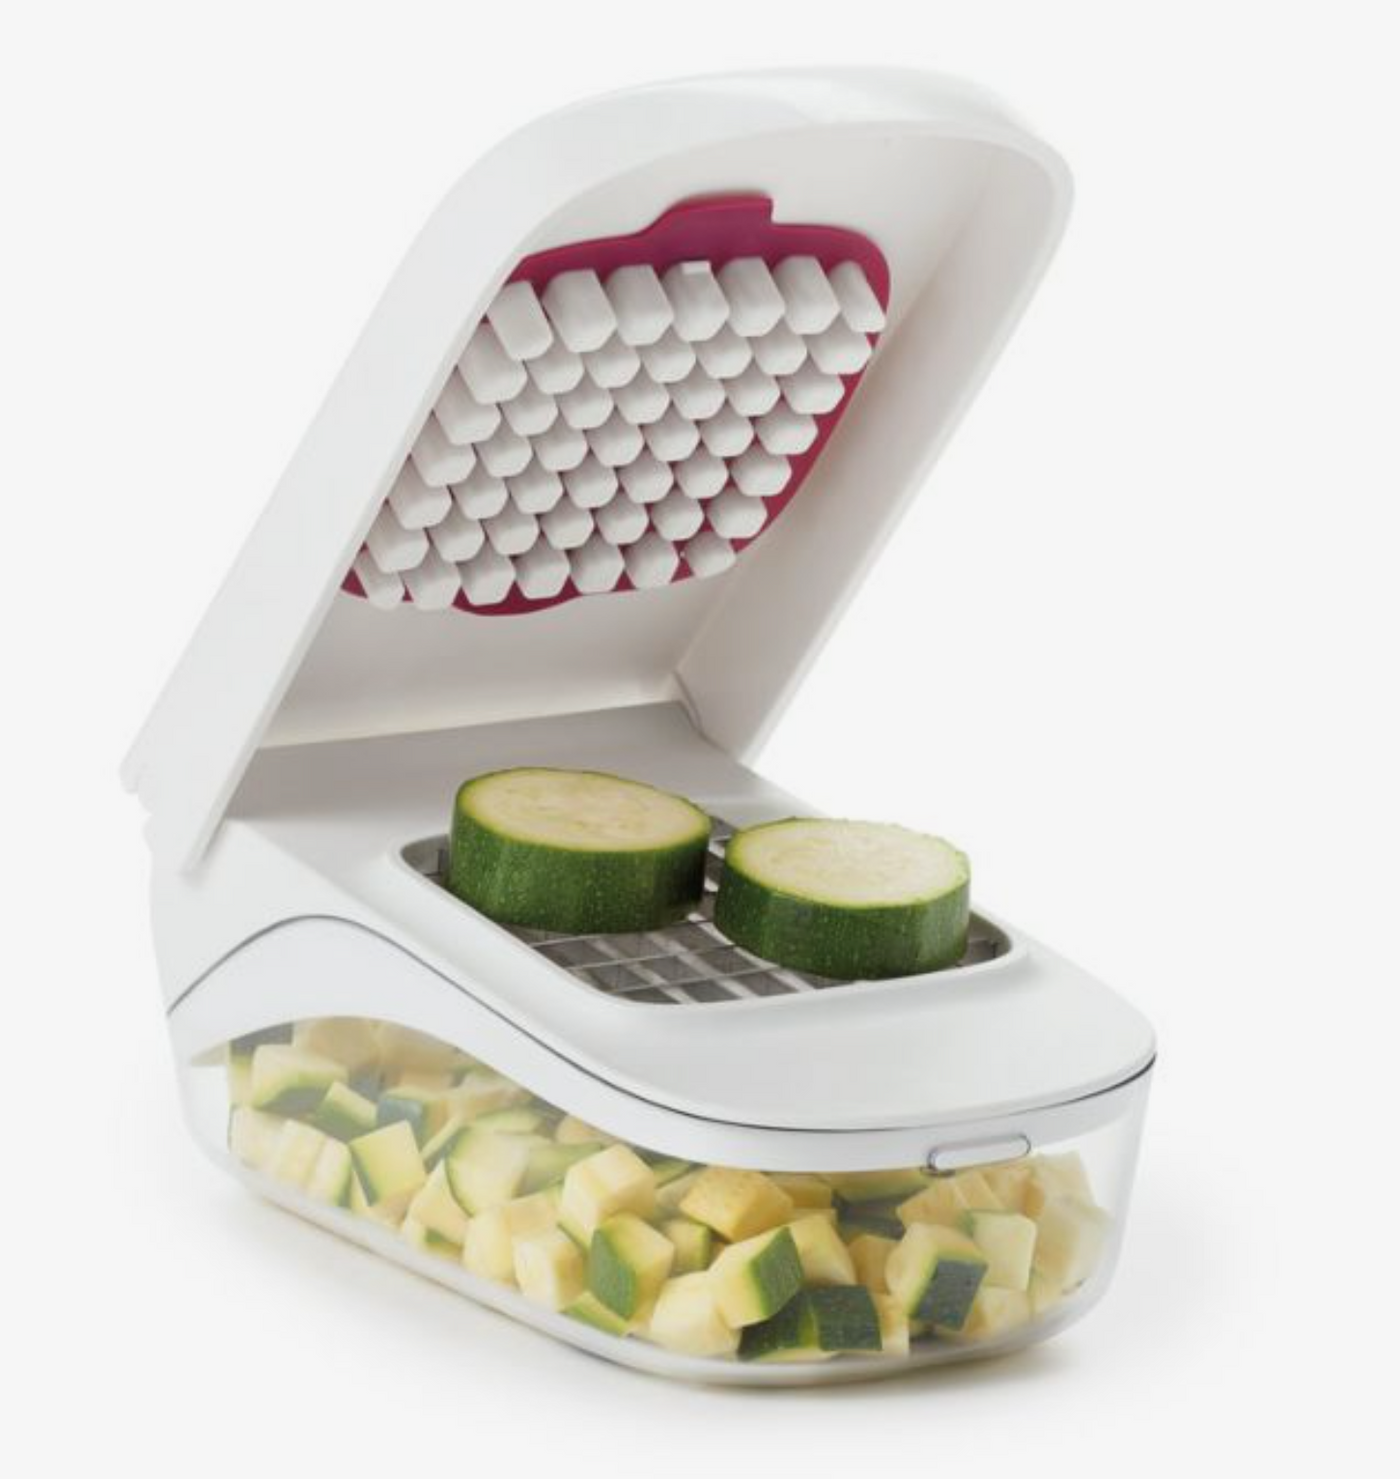 OXO Good Grips Simple Adjustable Mandoline Slicer | White | Brand New With  Box